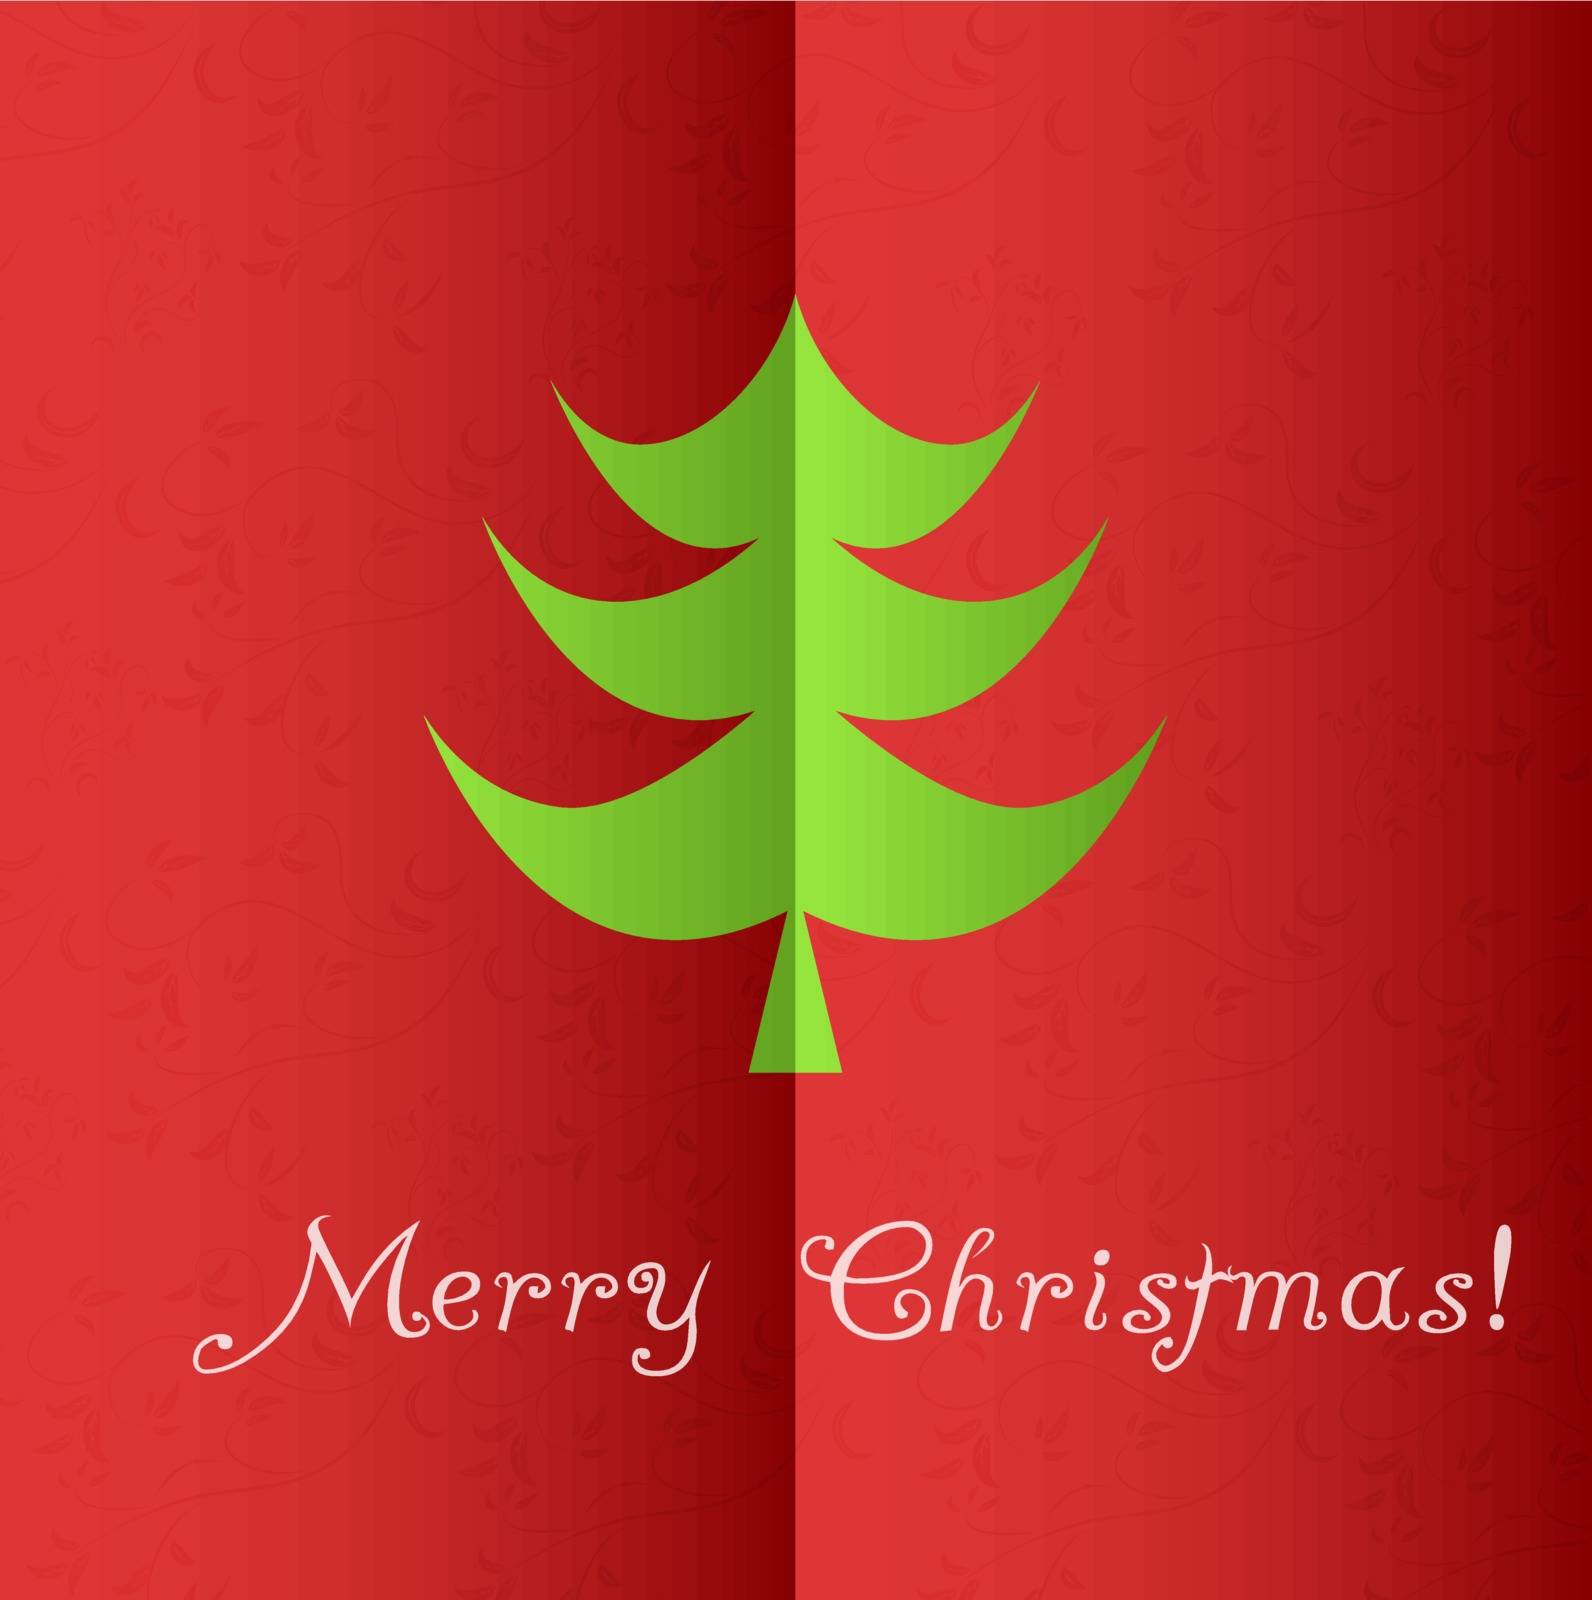 Christmas tree applique vector background. Eps 10